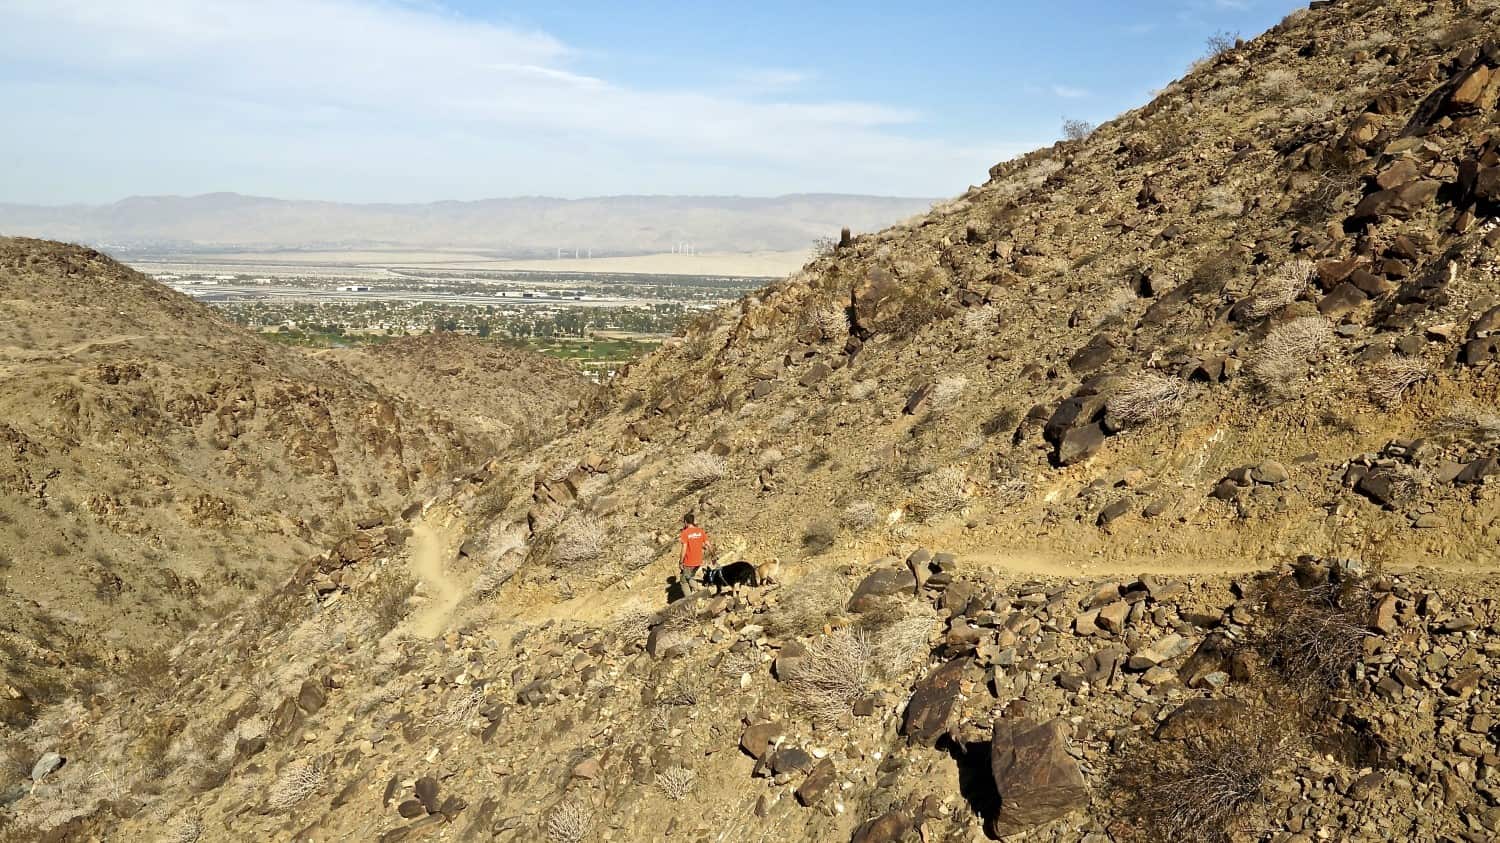 Man and dogs on the pet-friendly Araby Trail in Palm Springs, CA